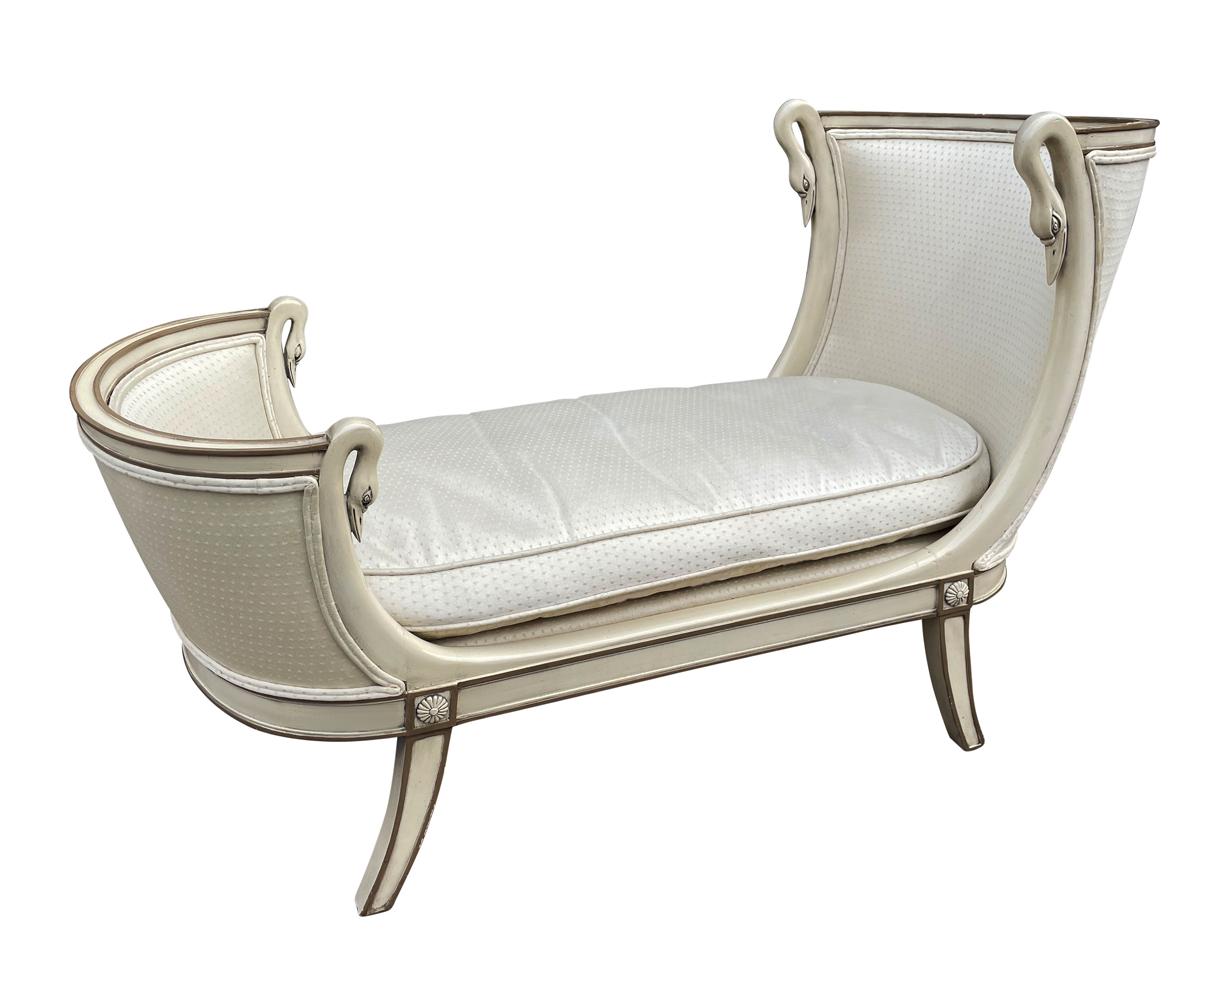 Hollywood Regency Italian Petite Chaise Lounge Chair in Cream with Swan Heads For Sale 2